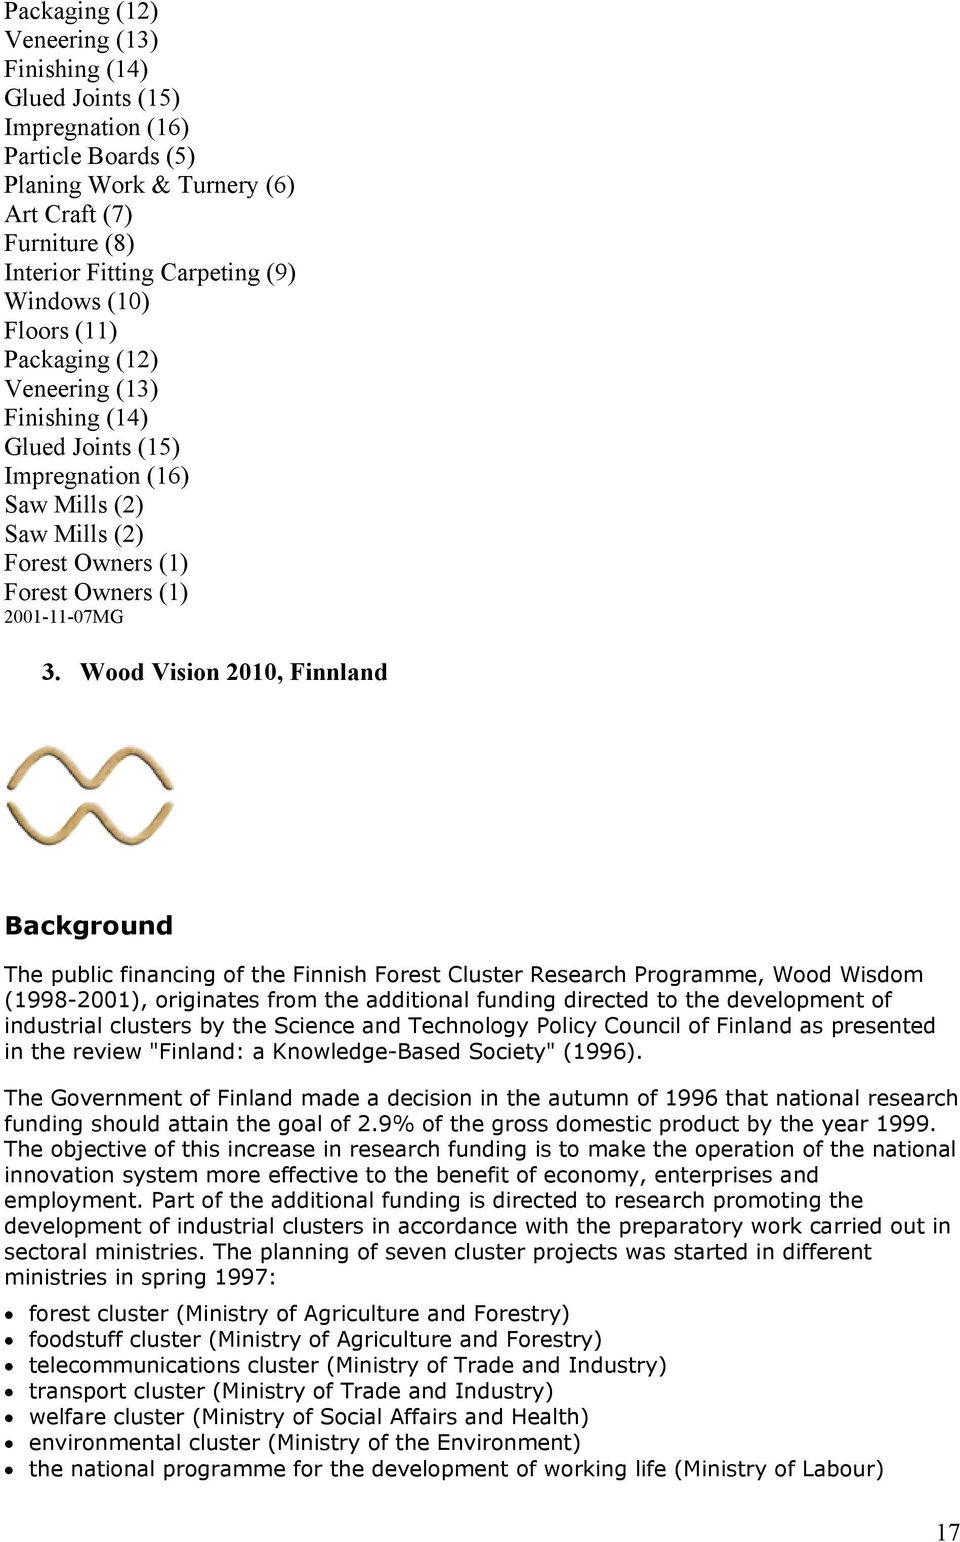 Wood Vision 2010, Finnland Background The public financing of the Finnish Forest Cluster Research Programme, Wood Wisdom (1998-2001), originates from the additional funding directed to the